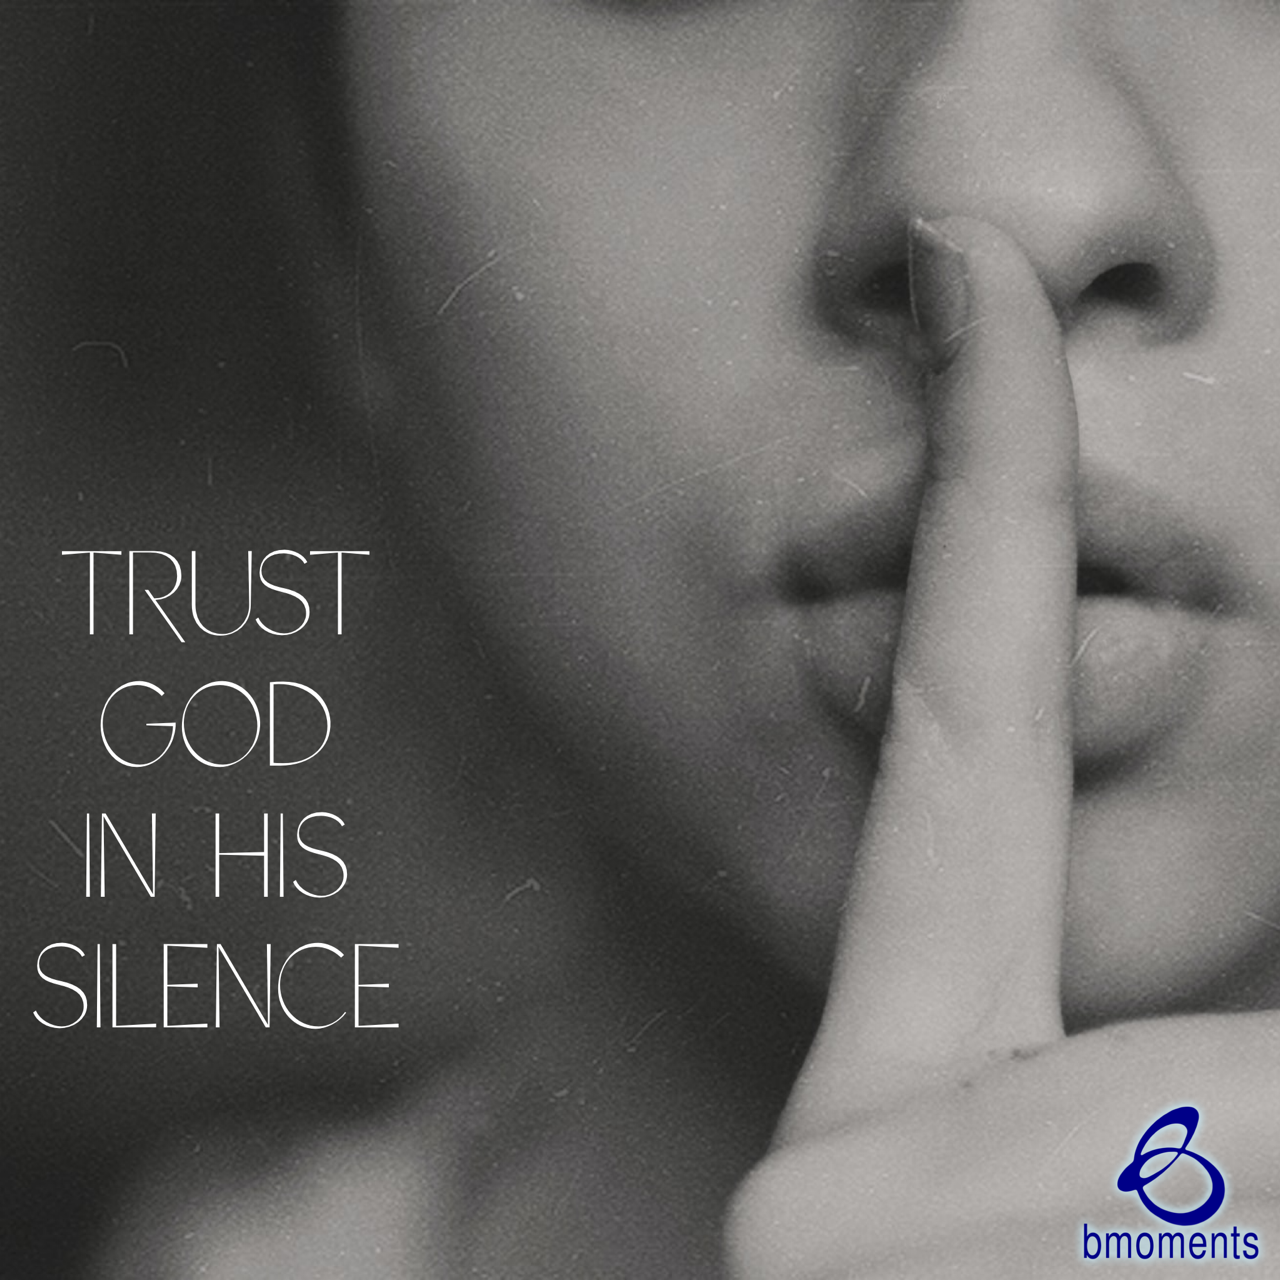 Trust God in His Silence